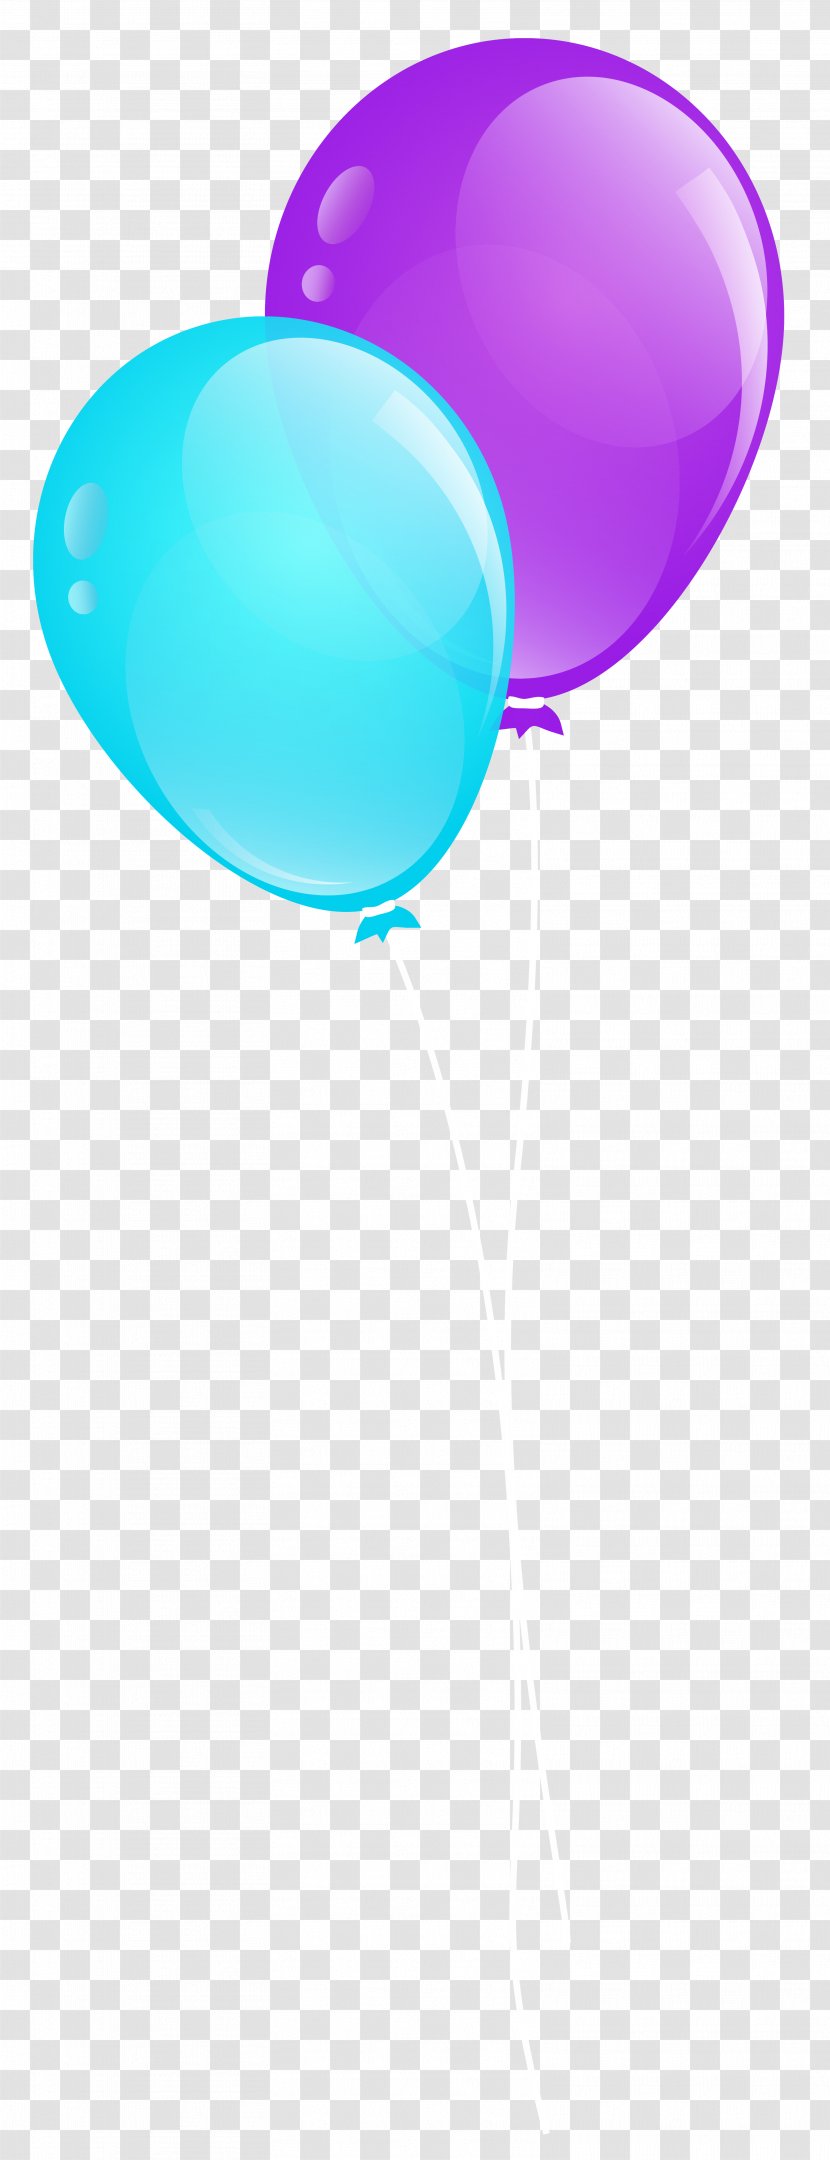 Balloon Purple Blue-green Clip Art - Silhouette - Balloons Cliparts Transparent PNG